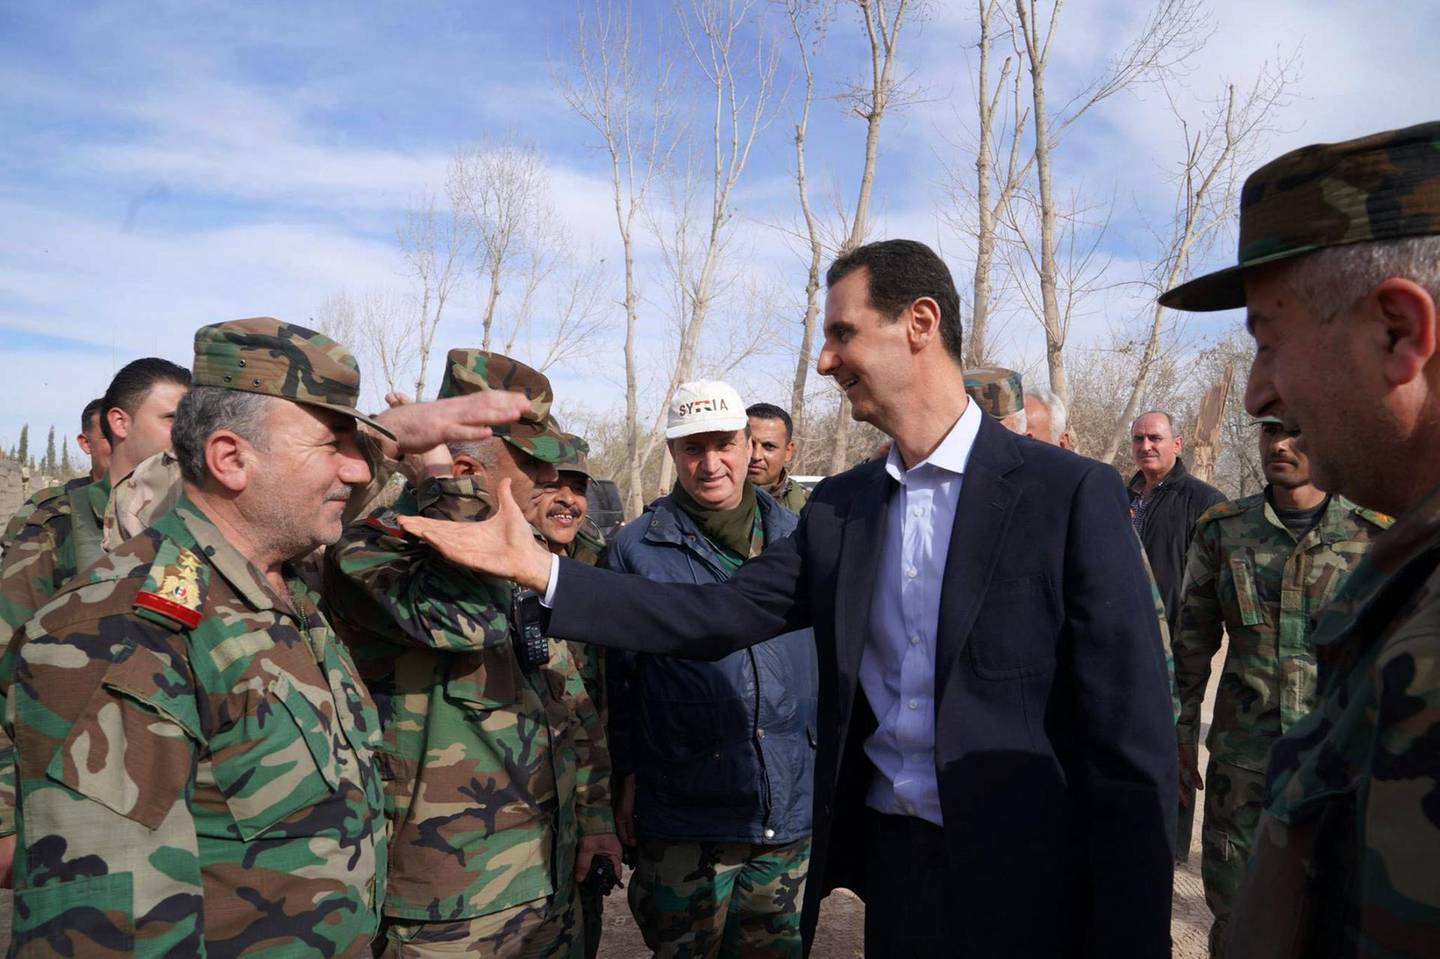 A handout picture released by the official Facebook page of the Syrian Presidency on March 18, 2018, shows Syrian President Bashar al-Assad (C) shaking hands with government troops in Eastern Ghouta, in the leader's first trip to the former rebel enclave outside Damascus in years. - Rebels have held out in Eastern Ghouta since 2012, but a regime assault in the last month has retaken more than 80 percent of the former opposition bastion, the Britain-based Syrian Observatory for Human Rights war monitor says. (Photo by HO / Syrian Presidency Facebook page / AFP) / RESTRICTED TO EDITORIAL USE - MANDATORY CREDIT "AFP PHOTO / HO / SYRIAN PRESIDENCY FACEBOOK PAGE" - NO MARKETING NO ADVERTISING CAMPAIGNS - DISTRIBUTED AS A SERVICE TO CLIENTS